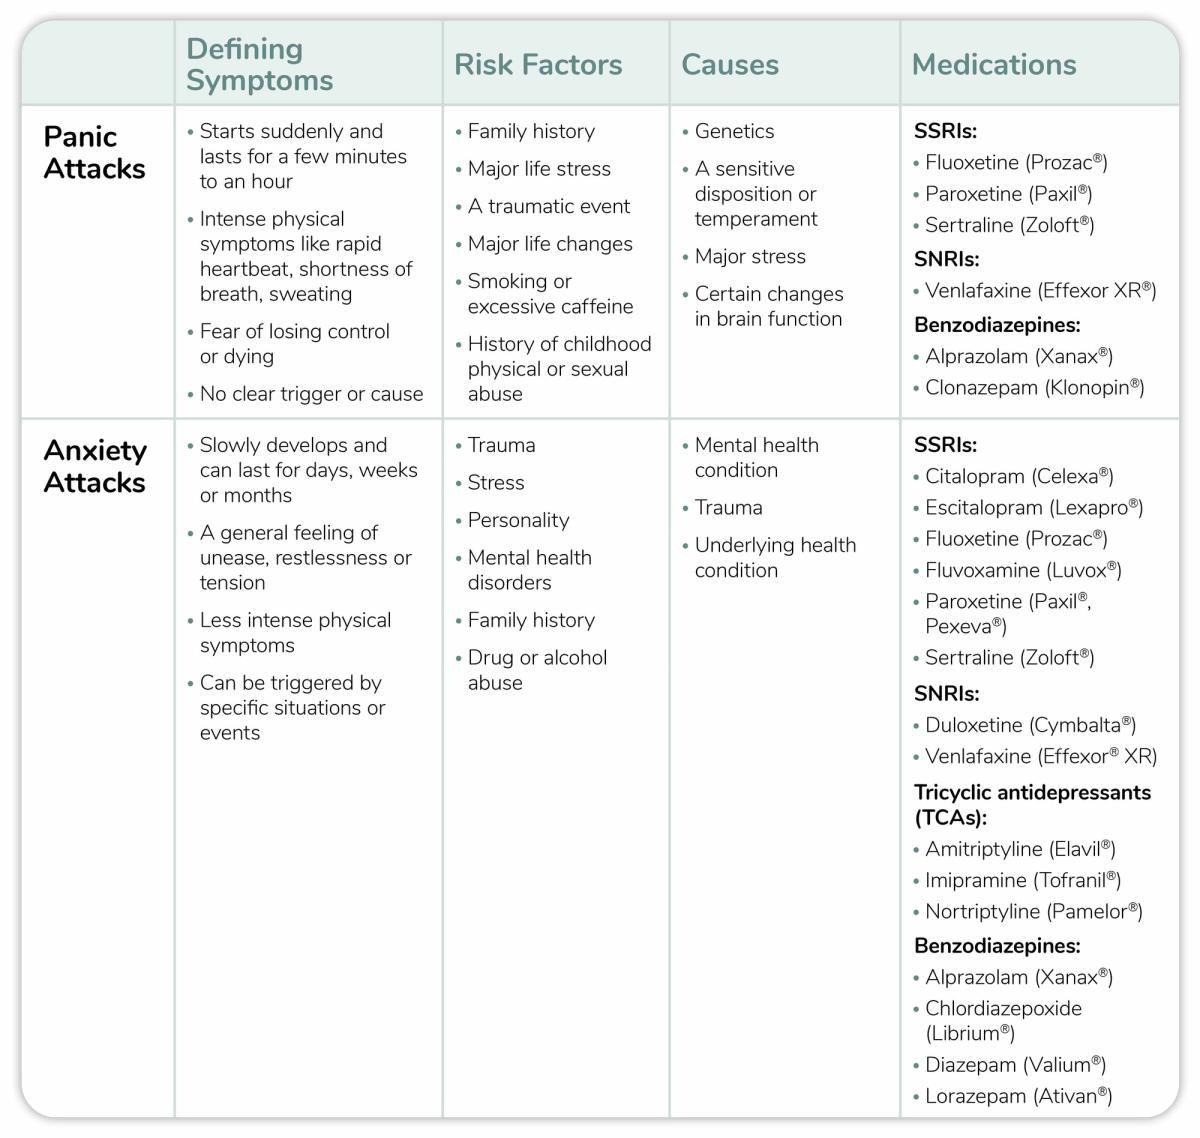 Chart Explaining Symptoms, Risk Factors, causes and Medications for Panic Attacks vs. Anxiety Attacks